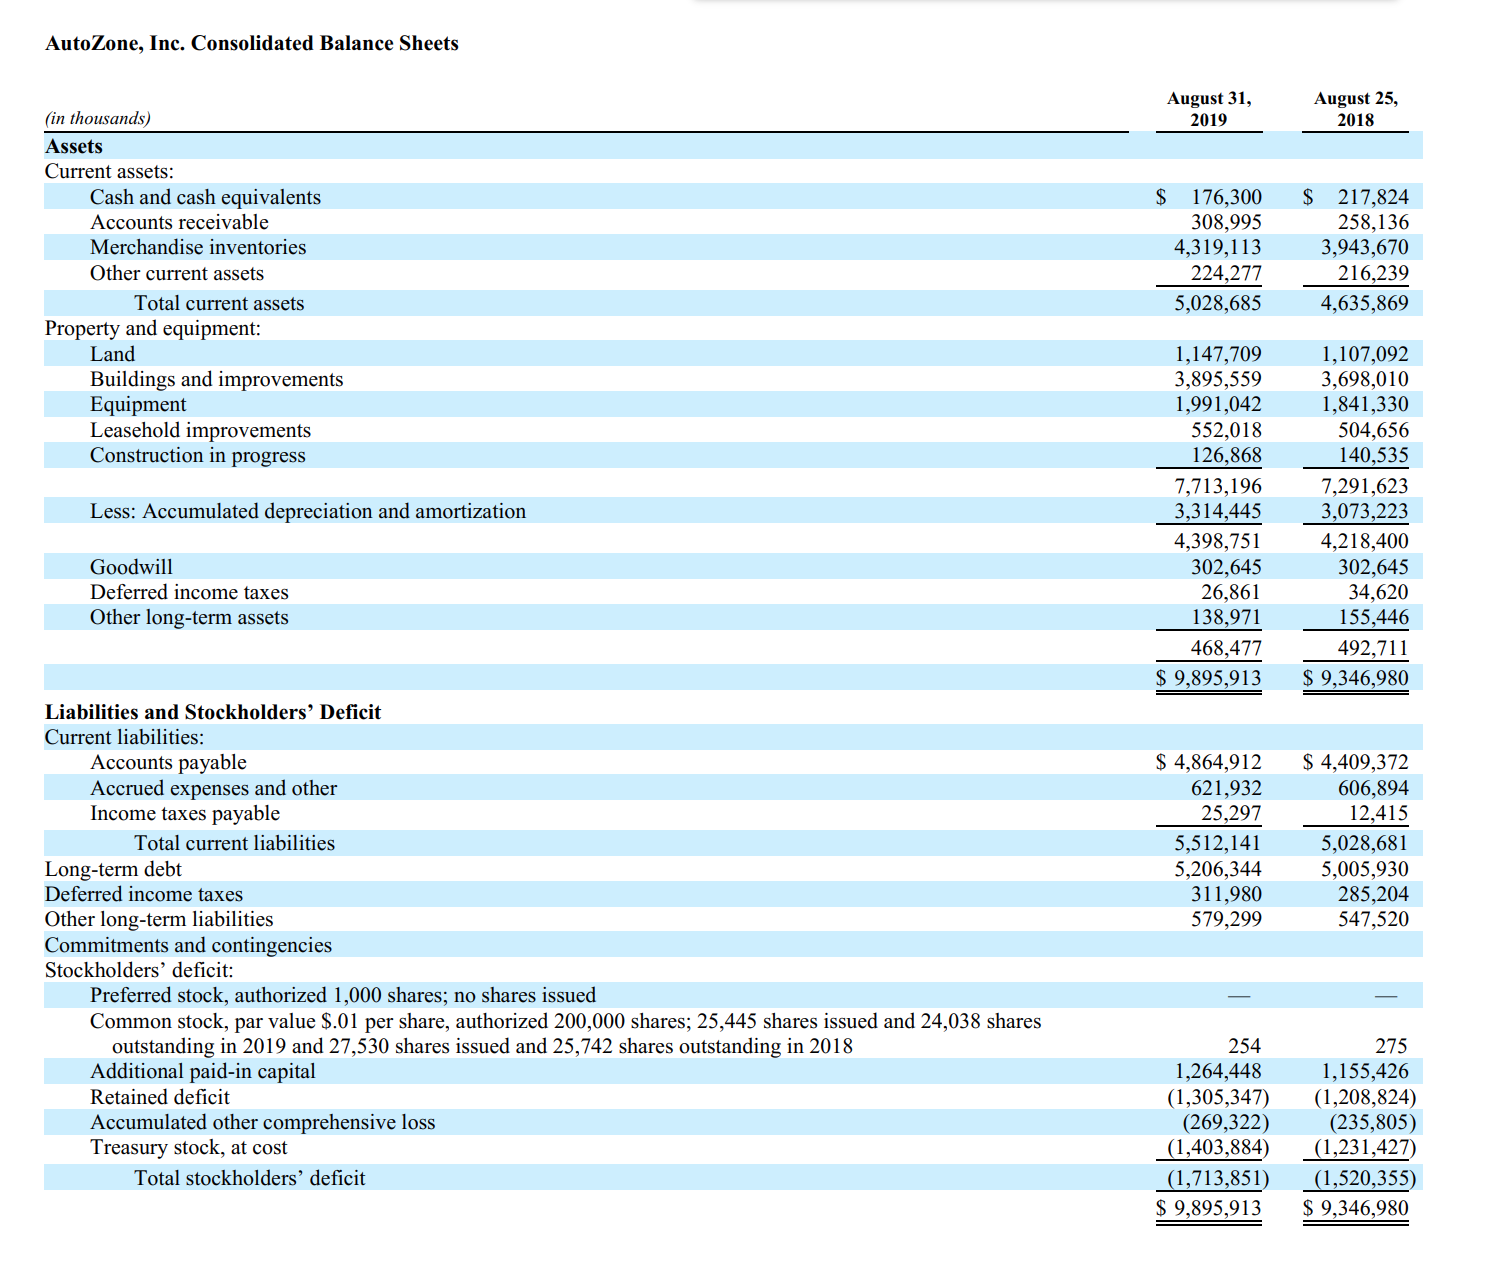 AutoZone, Inc. Consolidated Balance Sheets
August 31,
2019
August 25,
2018
(in thousands)
Assets
Current assets:
Cash and cash equivalents
$ 176,300
308,995
4,319,113
224,277
$ 217,824
258,136
3,943,670
216,239
4,635,869
Accounts receivable
Merchandise inventories
Other current assets
Total current assets
5,028,685
Property and equipment:
Land
Buildings and improvements
Equipment
Leasehold improvements
Construction in progress
1,147,709
3,895,559
1,991,042
552,018
126,868
1,107,092
3,698,010
1,841,330
504,656
140,535
7,713,196
3,314,445
7,291,623
3,073,223
Less: Accumulated depreciation and amortization
4,398,751
302,645
26,861
138,971
4,218,400
302,645
34,620
155,446
Goodwill
Deferred income taxes
Other long-term assets
468,477
492,711
$ 9,895,913
$ 9,346,980
Liabilities and Stockholders' Deficit
Current liabilities:
Accounts payable
Accrued expenses and other
Income taxes payable
$ 4,864,912
621,932
25,297
$ 4,409,372
606,894
12,415
Total current liabilities
Long-term debt
Deferred income taxes
Other long-term liabilities
Commitments and contingencies
5,512,141
5,206,344
311,980
579,299
5,028,681
5,005,930
285,204
547,520
Stockholders' deficit:
Preferred stock, authorized 1,000 shares; no shares issued
Common stock, par value $.01 per share, authorized 200,000 shares; 25,445 shares issued and 24,038 shares
outstanding in 2019 and 27,530 shares issued and 25,742 shares outstanding in 2018
Additional paid-in capital
254
275
1,264,448
(1,305,347)
(269,322)
(1,403,884)
1,155,426
(1,208,824)
(235,805)
(1,231,427)
Retained deficit
Accumulated other comprehensive loss
Treasury stock, at cost
(1,713,851)
$ 9,895,913
Total stockholders' deficit
(1,520,355)
$ 9,346,980
